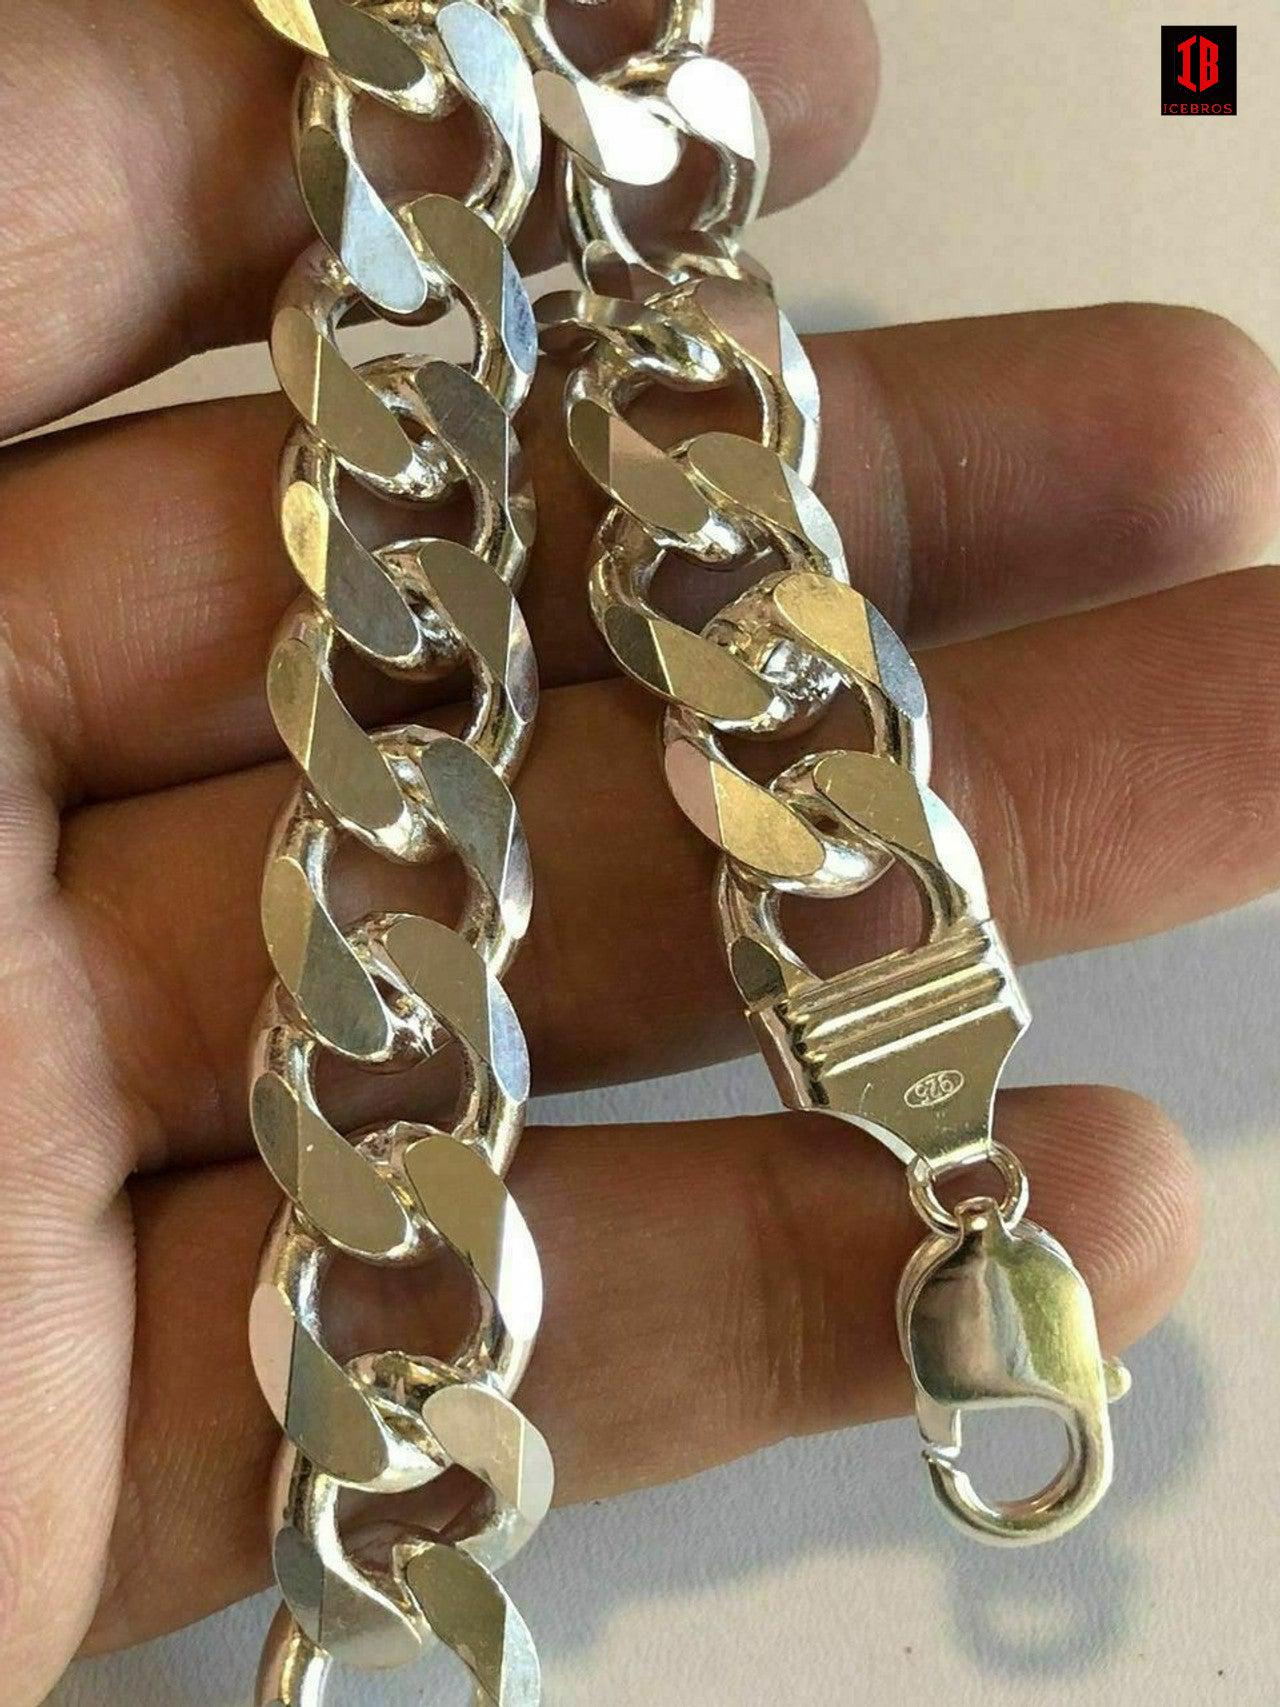 White Gold Vermeil Over 925 Sterling Silver Miami Cuban Curb Link Bracelet Made In Italy